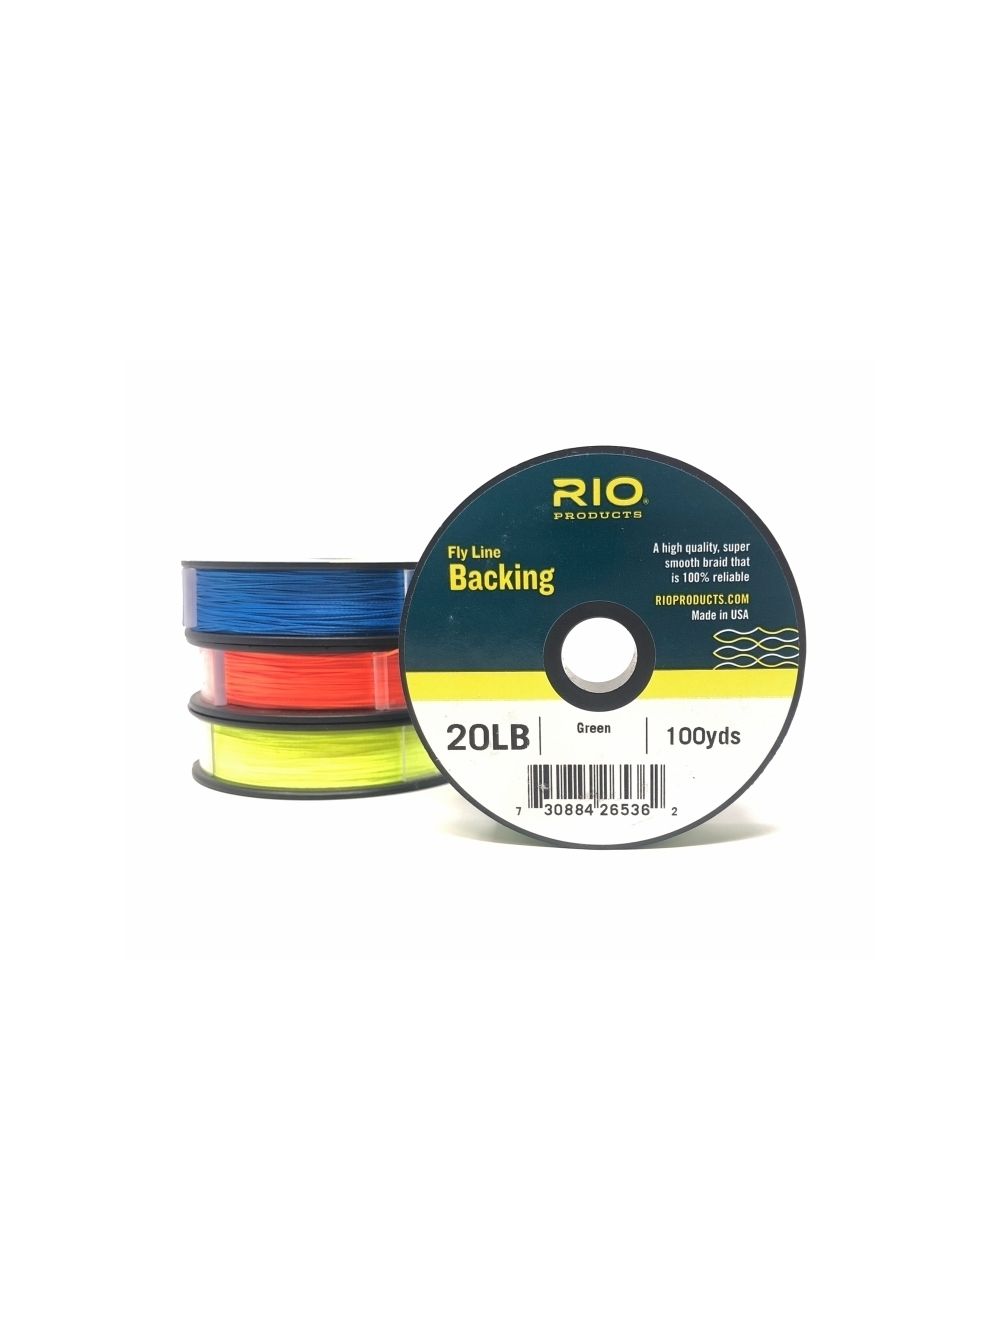 Fly Fishing Tech Tips: What to use for fly line backing - Dacron or Braid 